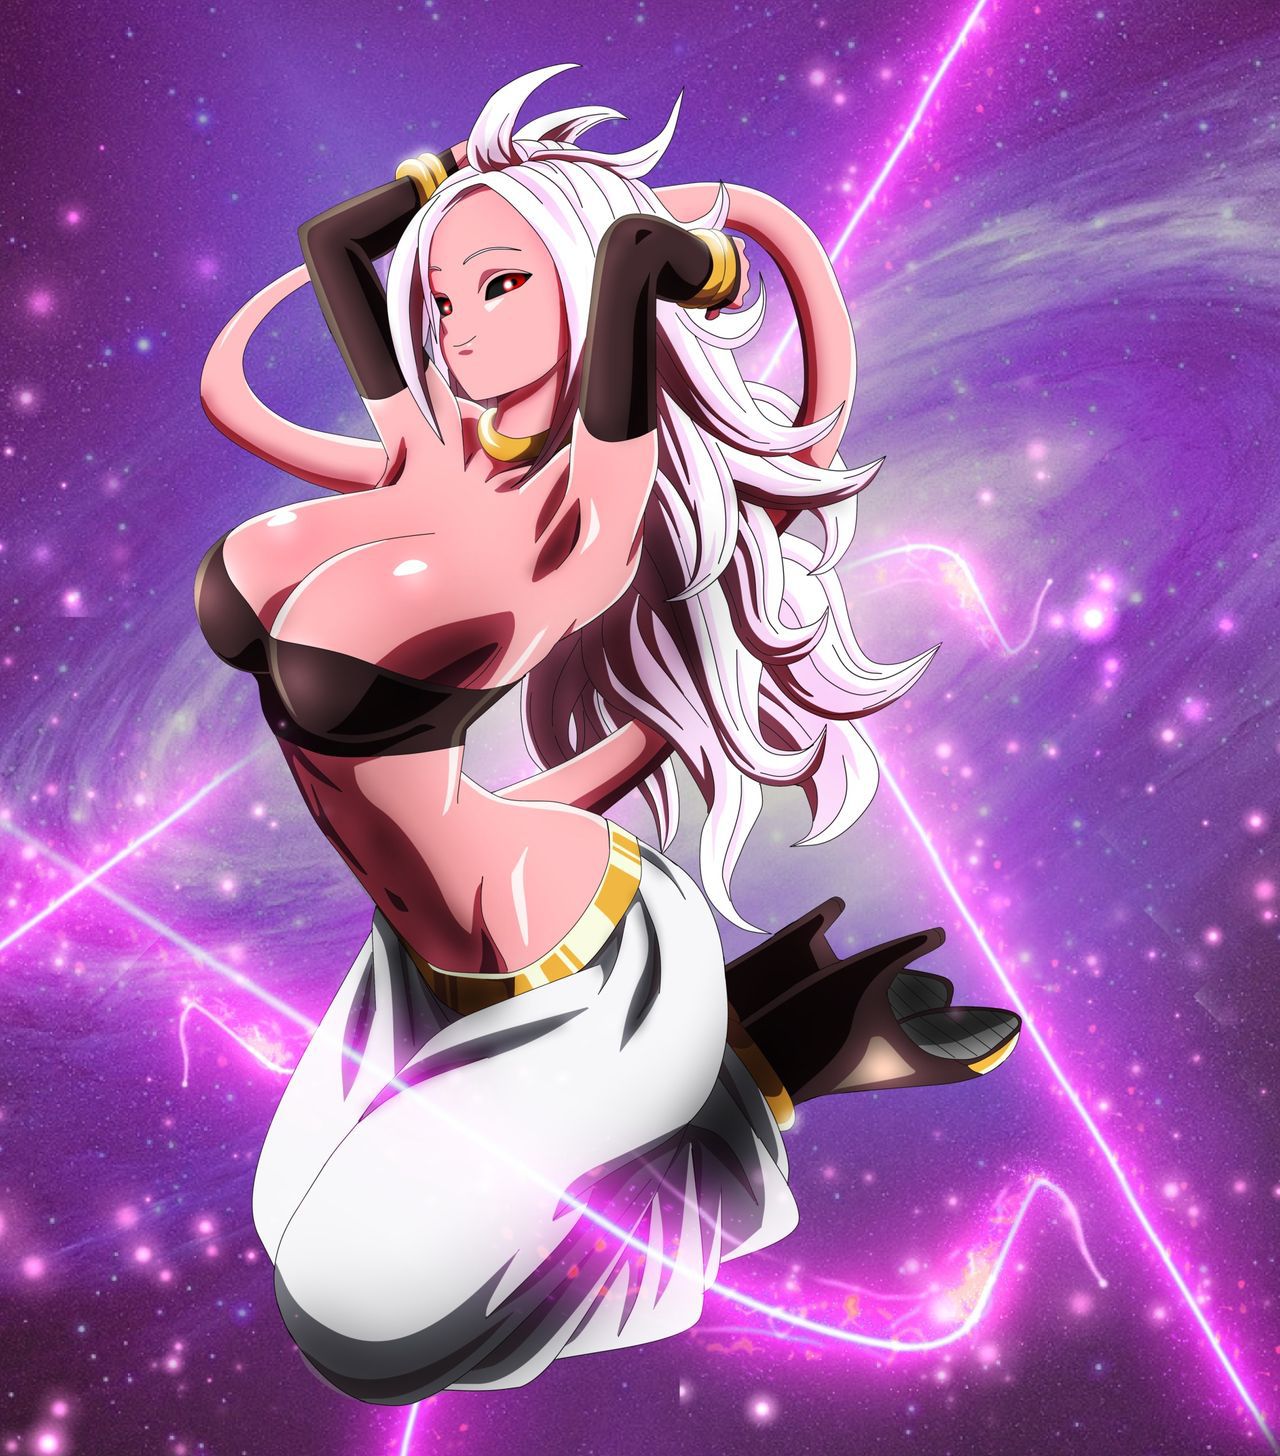 My Favorite Android 21 Pics 123